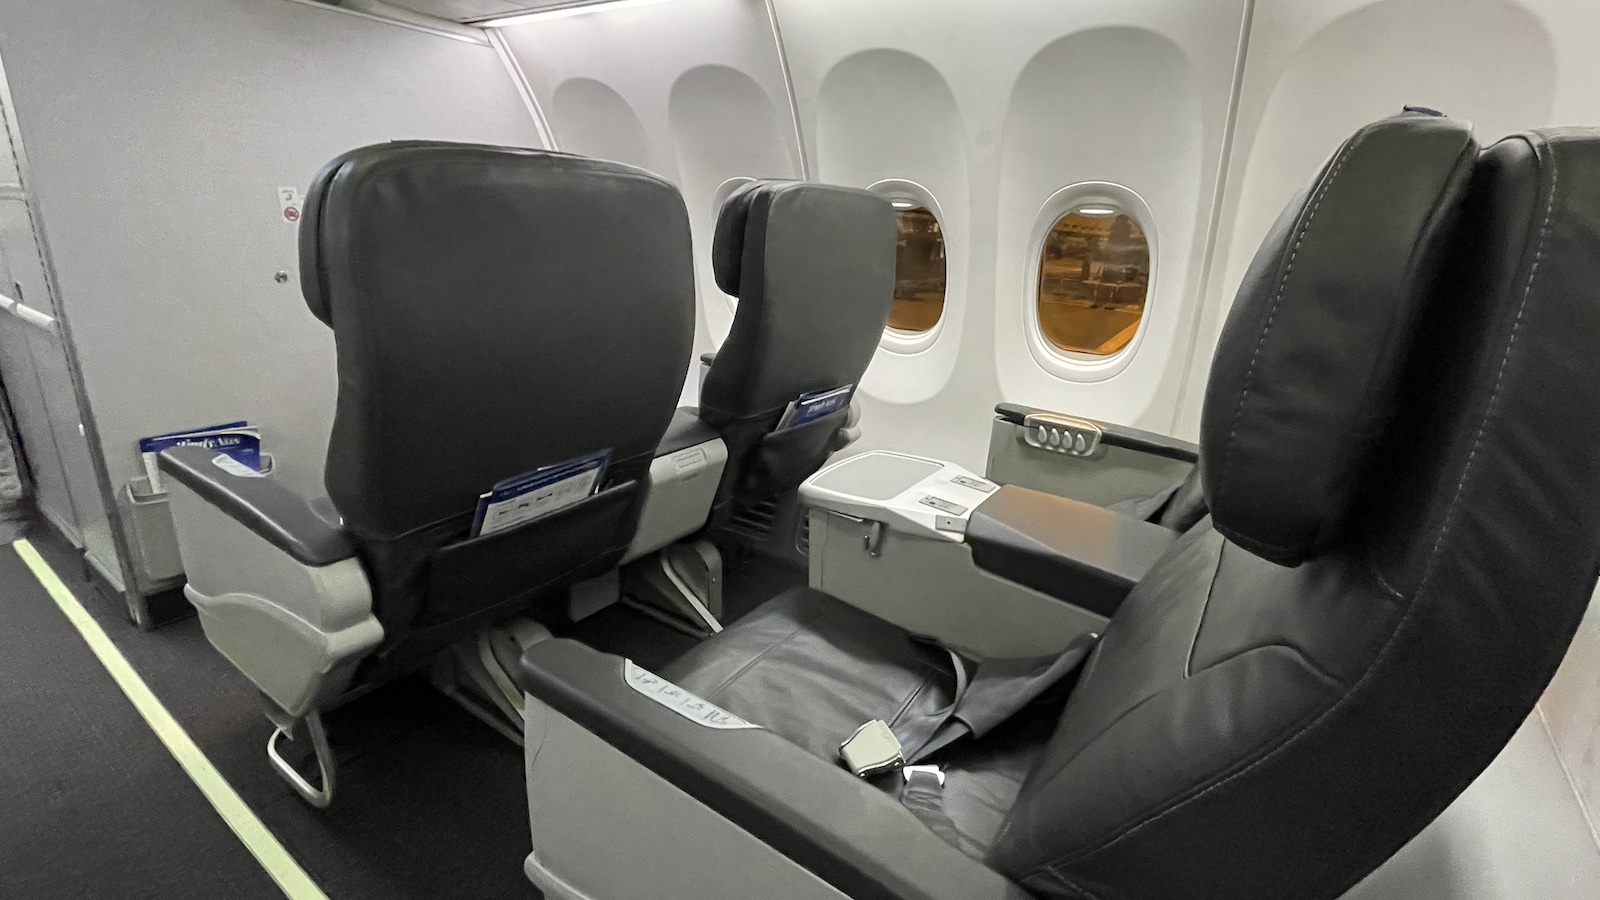 Rex Airlines Brisbane to Sydney Boeing 737 Business Class Seat Rear Point Hacks